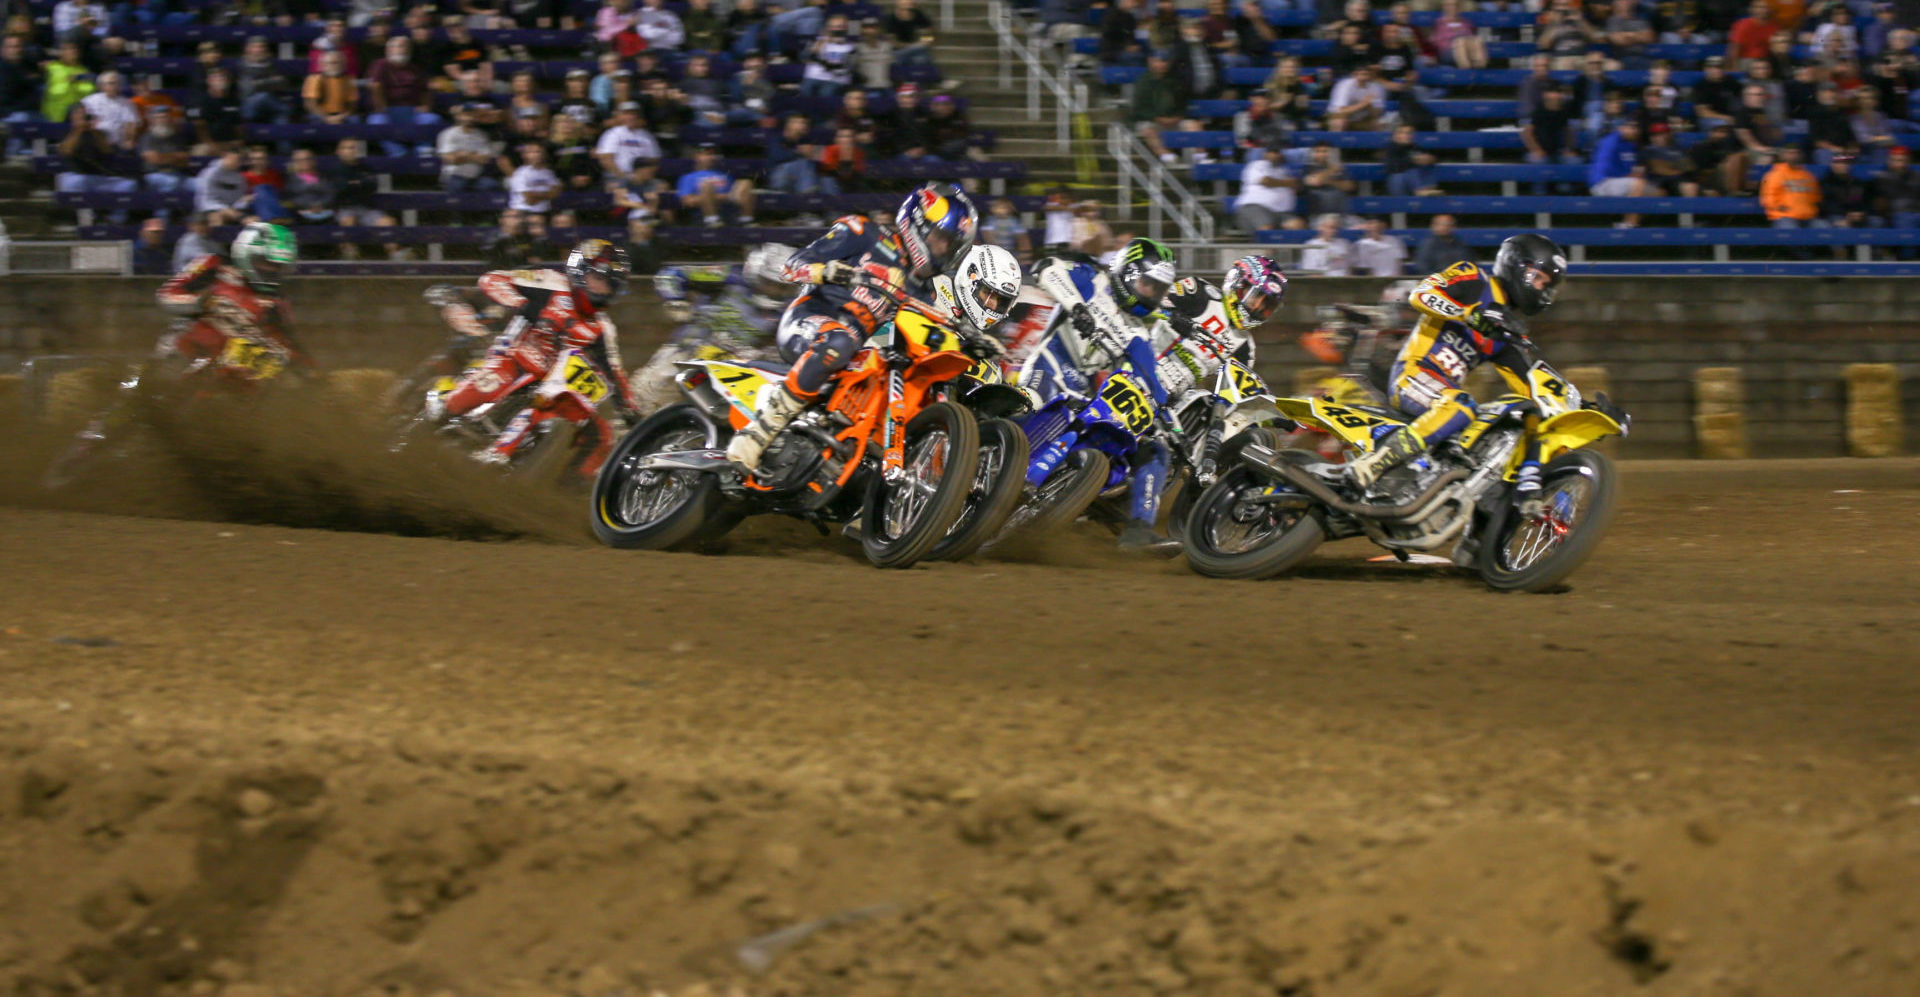 Action from the AFT Singles Springfield Short Track race in 2019. Photo by Scott Hunter, courtesy AFT.